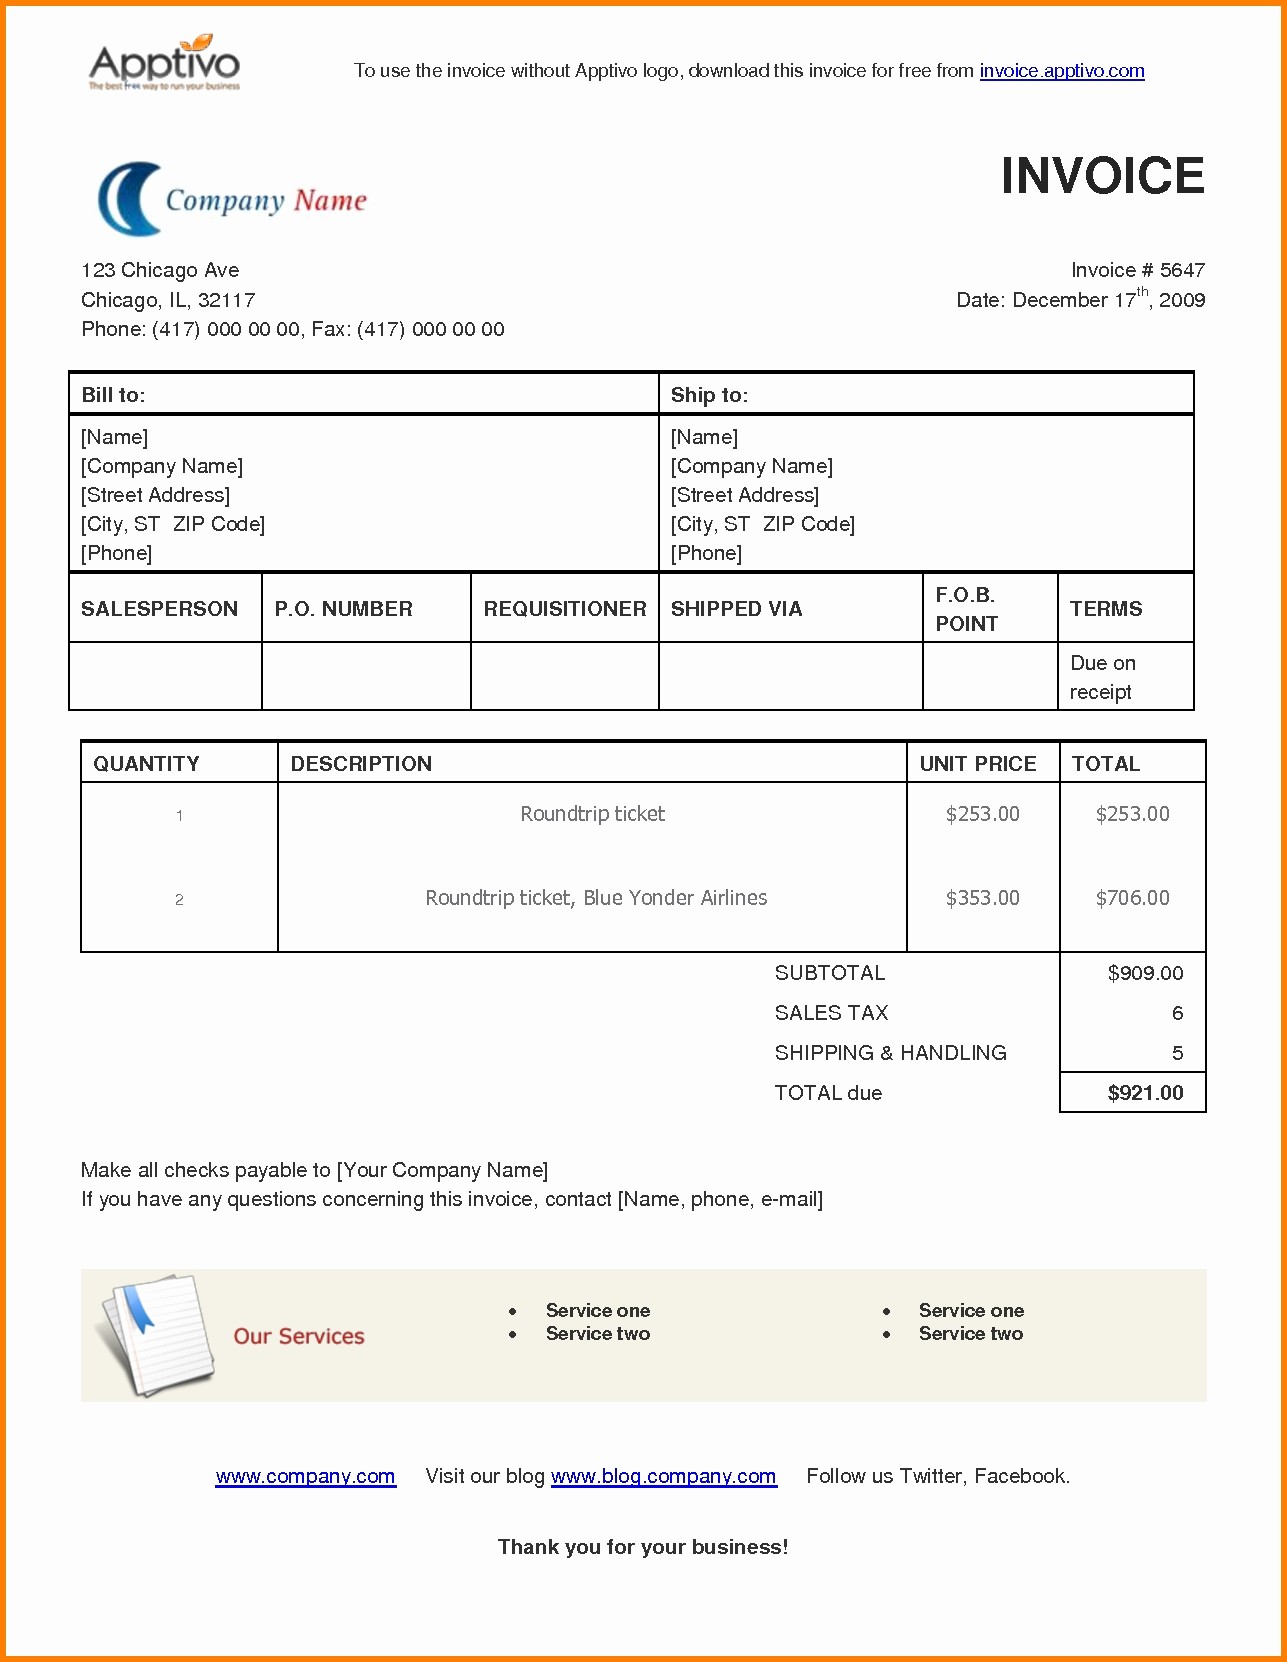 Microsoft Word Receipt Template Free Awesome Microsoft Invoice Templates Invoice Template Ideas